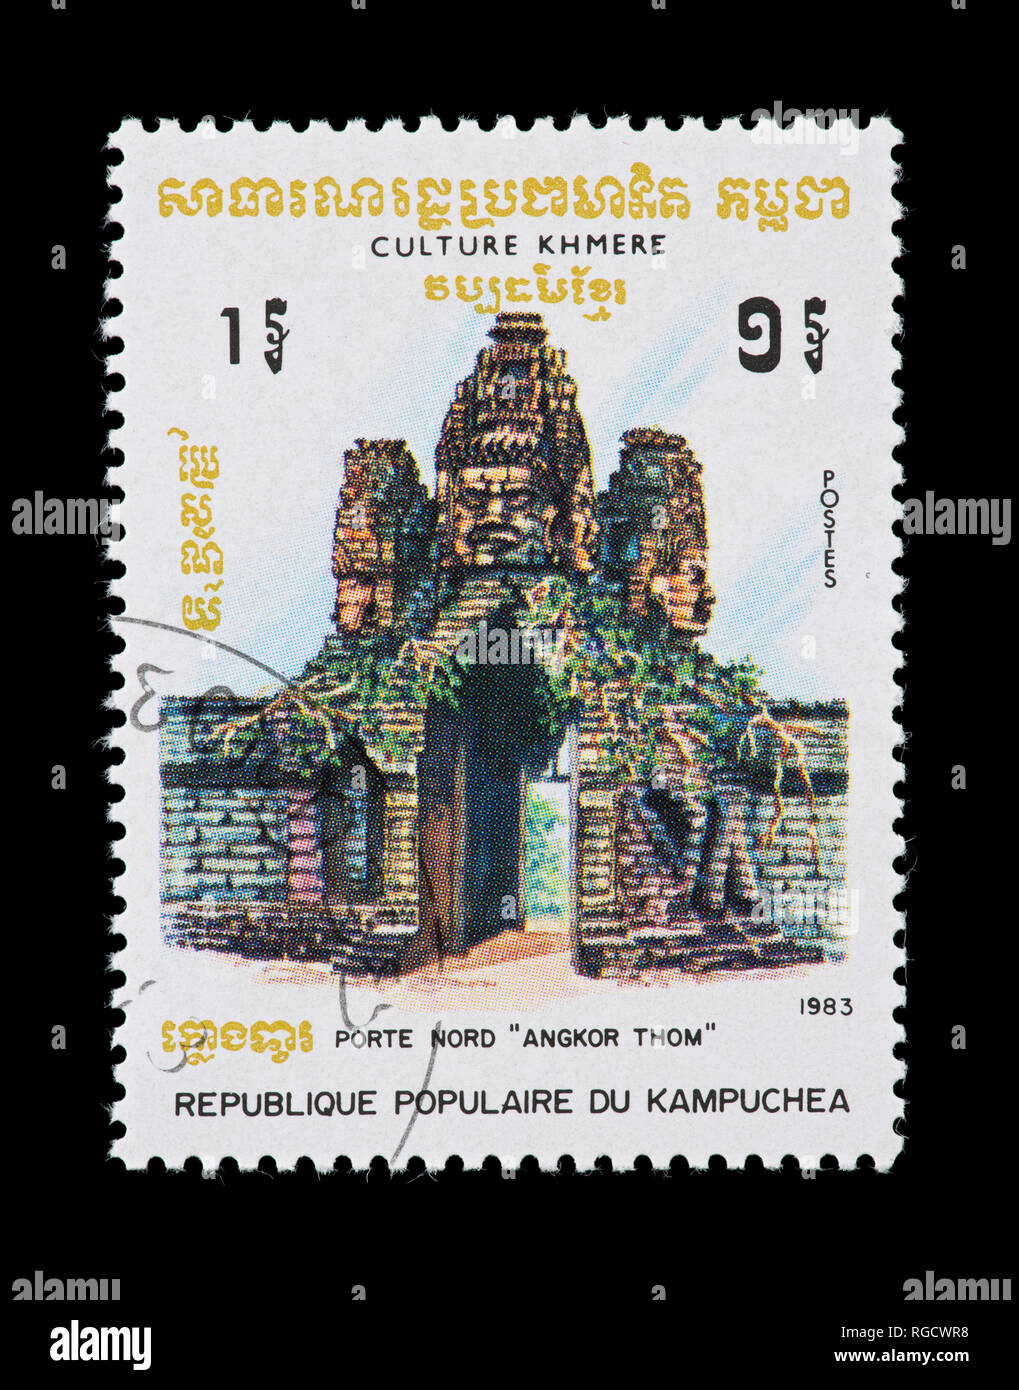 Postage stamp from Cambodia (Kampuchea) depicting the north gate of  Angkor Thom, for Khmer culture. Stock Photo